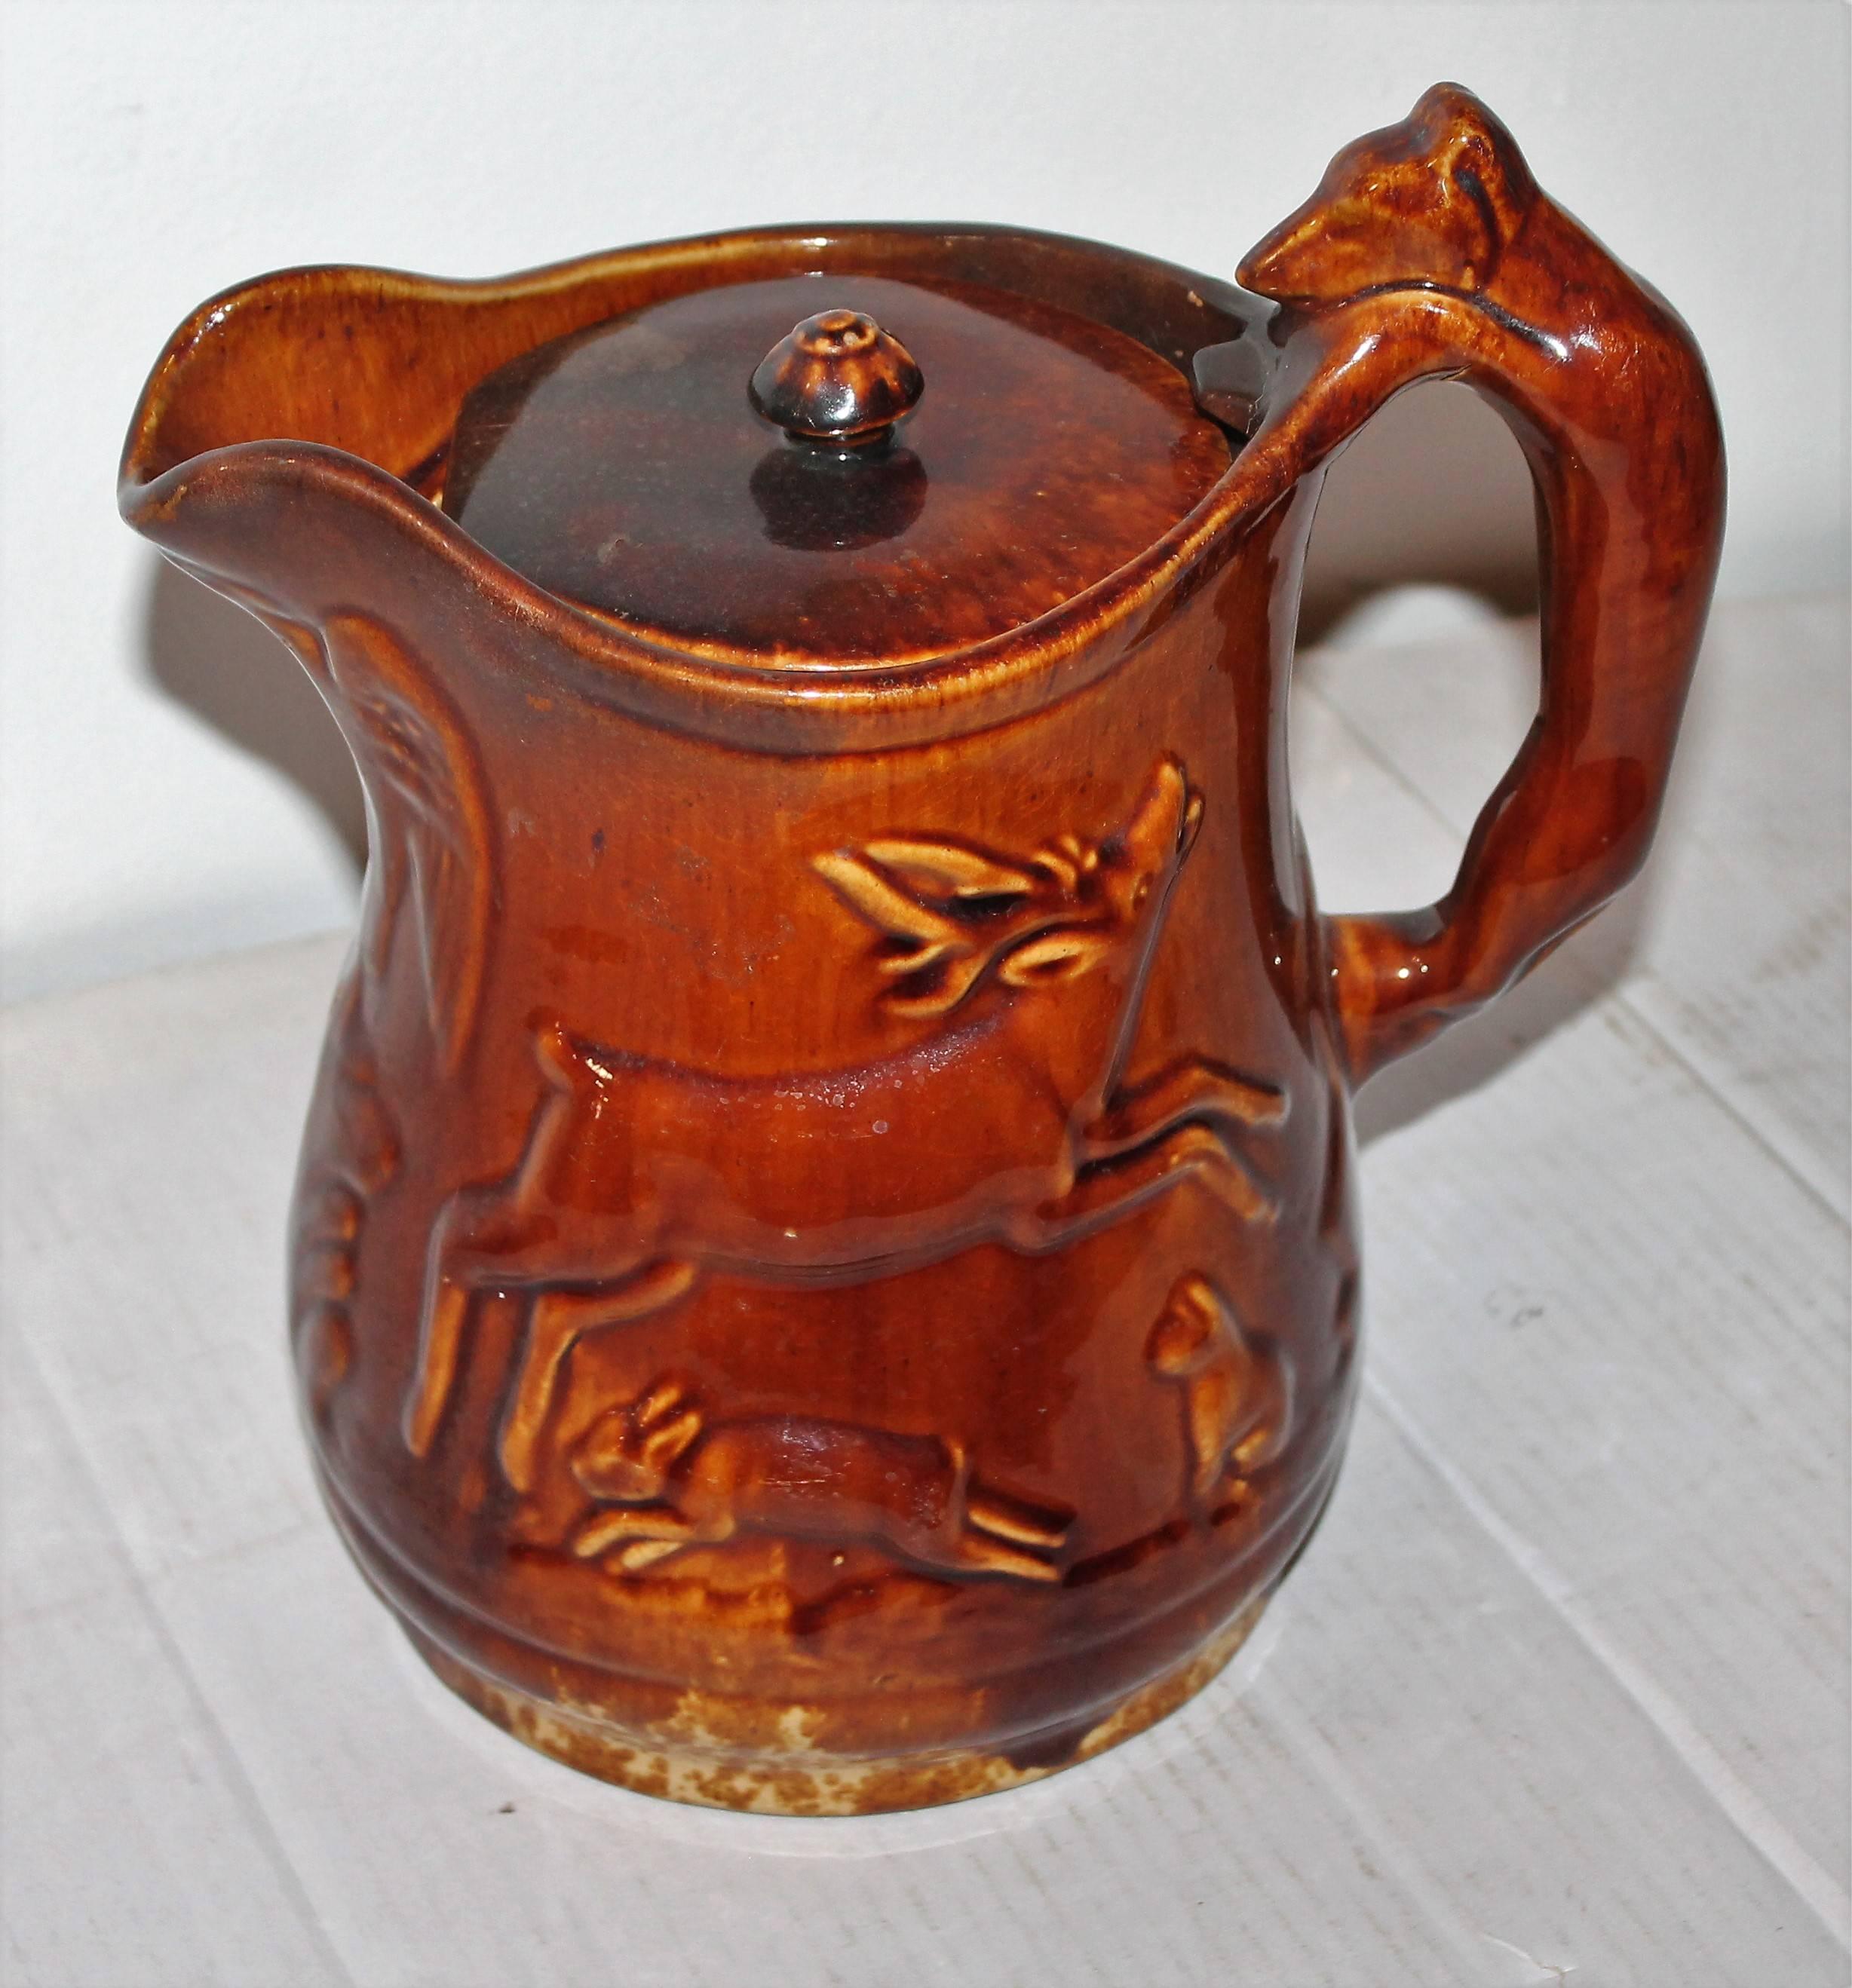 This fine example of Rockingham / Bennington 19th century pottery is in mint condition and has the original lid. There is an American eagle on the spout and dogs, deer, rabbits, cats and a turkey. The handle is a dog, possibly a fox terrier. So very